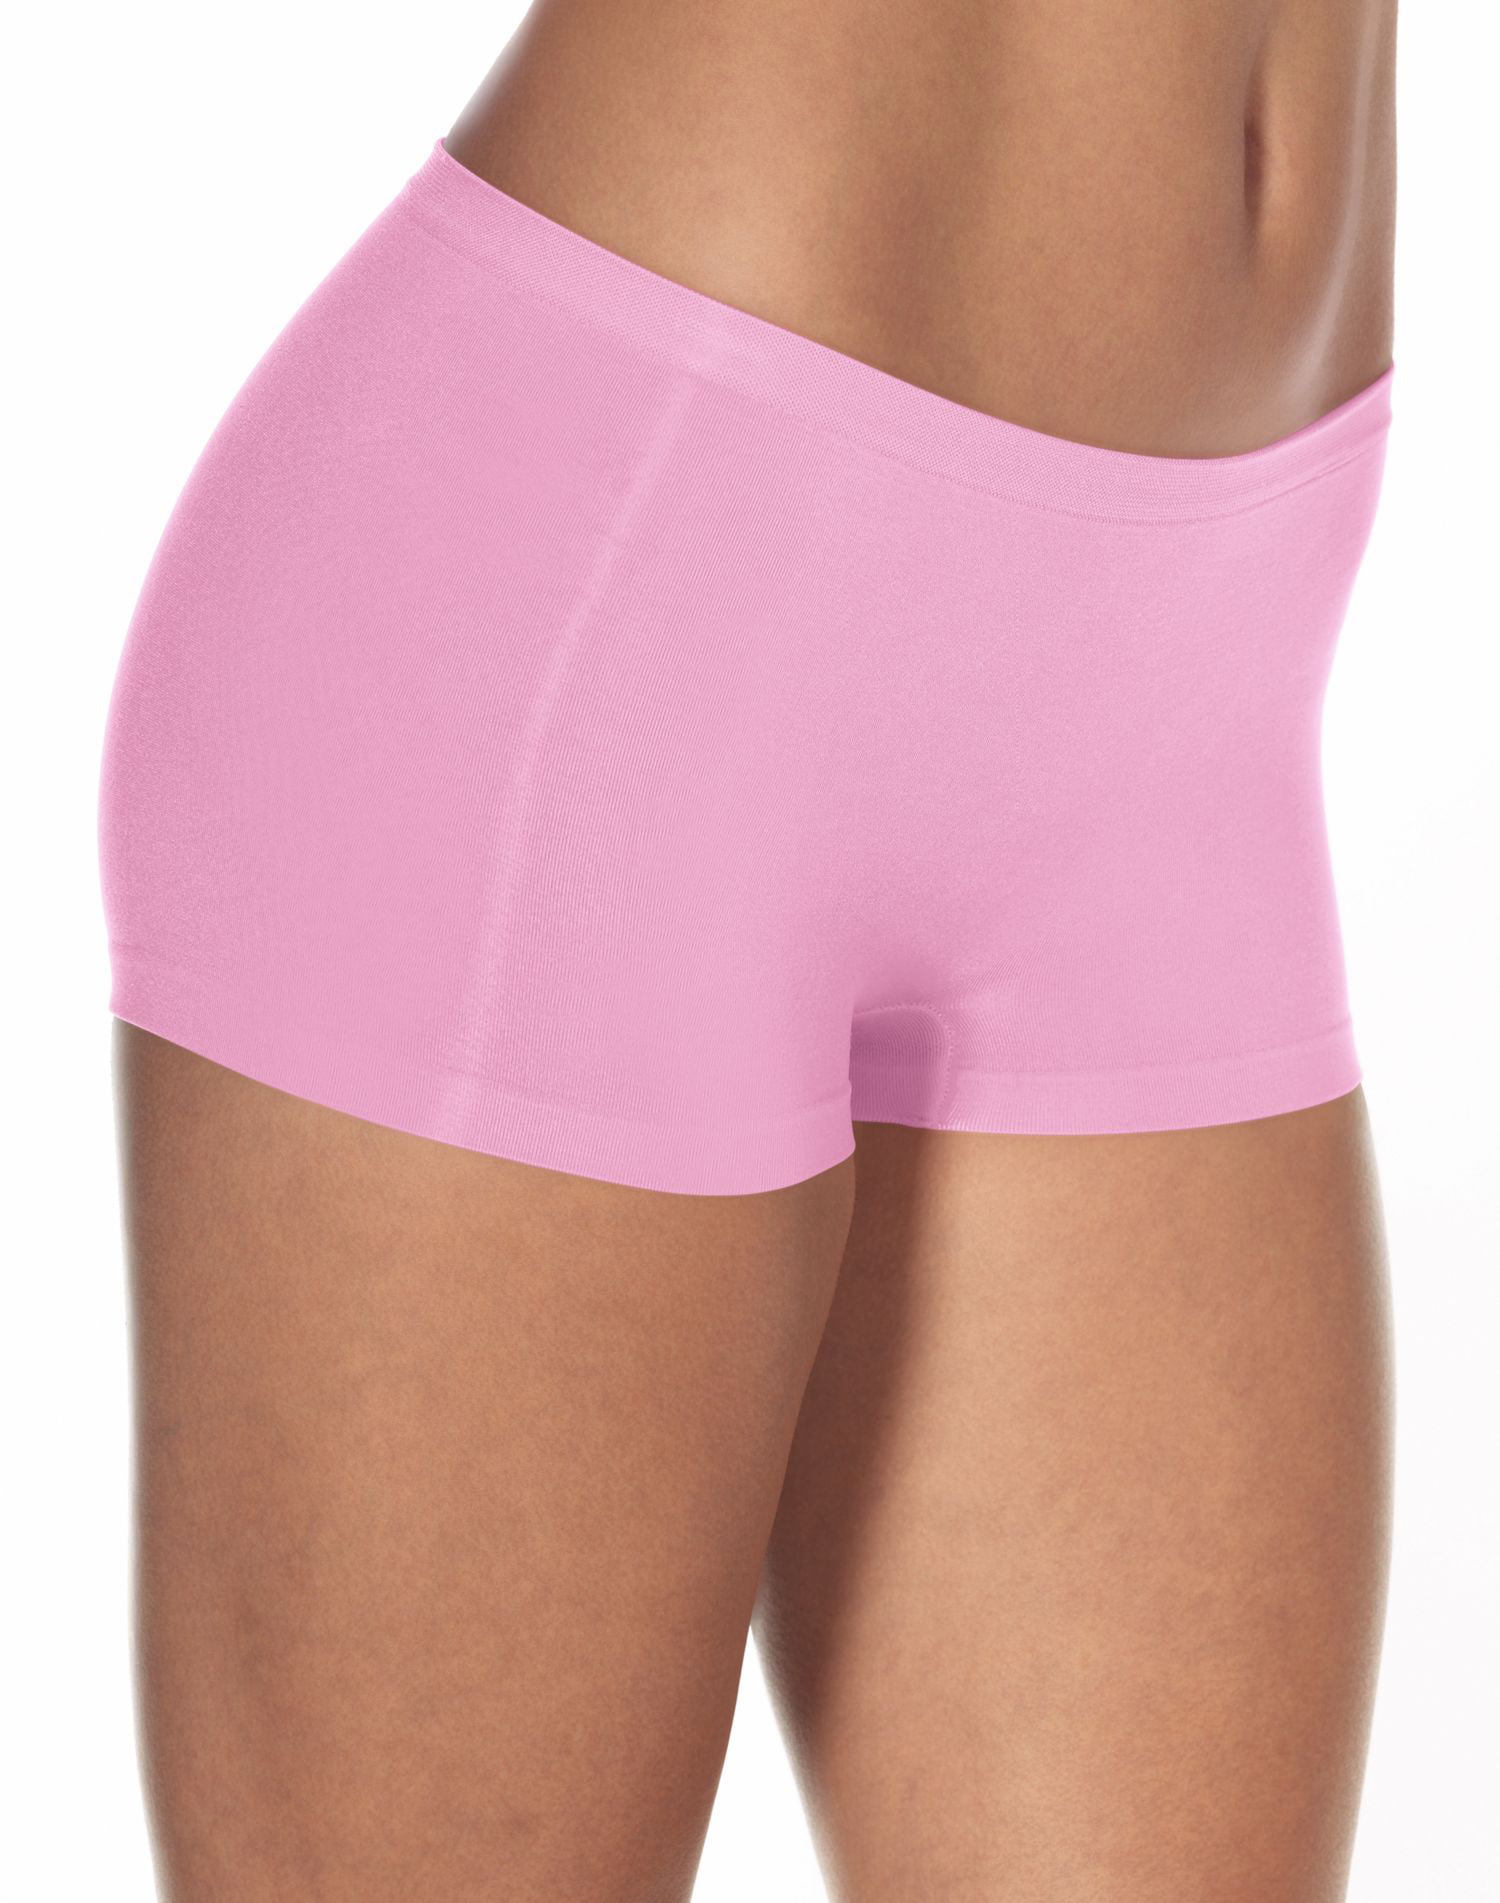 Barely There Womens Flex To Fit Boyshort Panty 